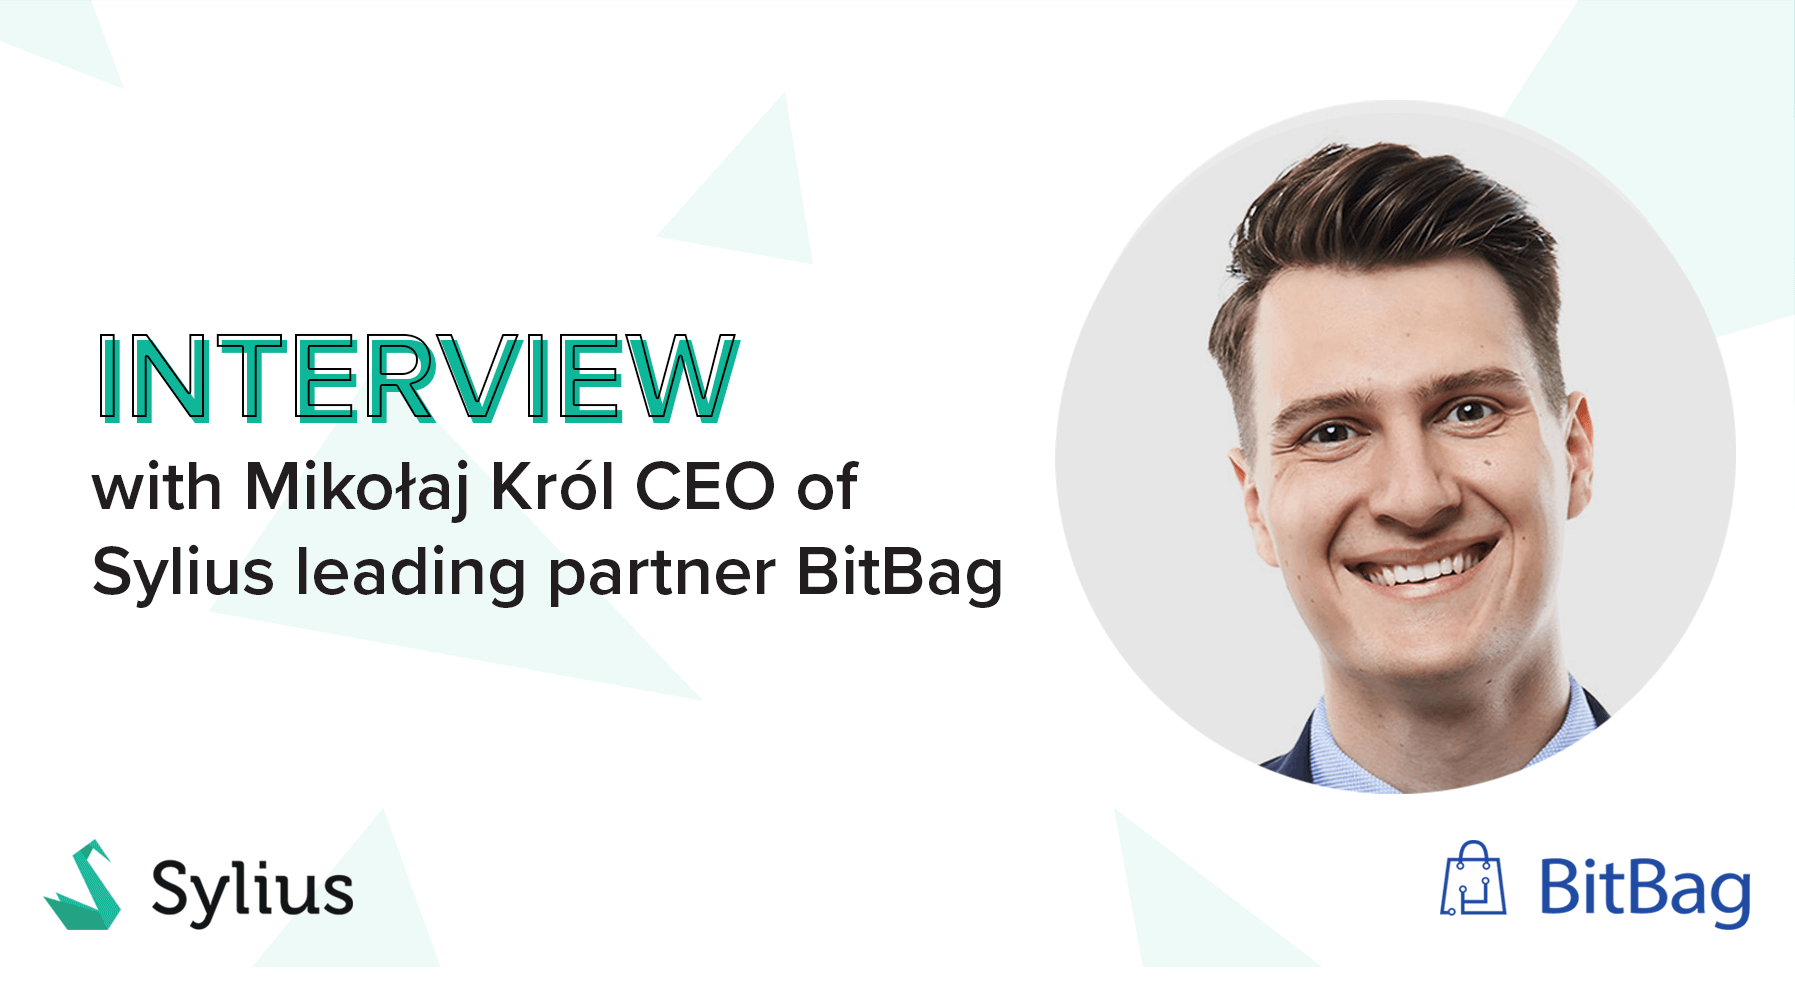 Short tale about replatforming by Mikołaj Król CEO of Sylius leading partner BitBag